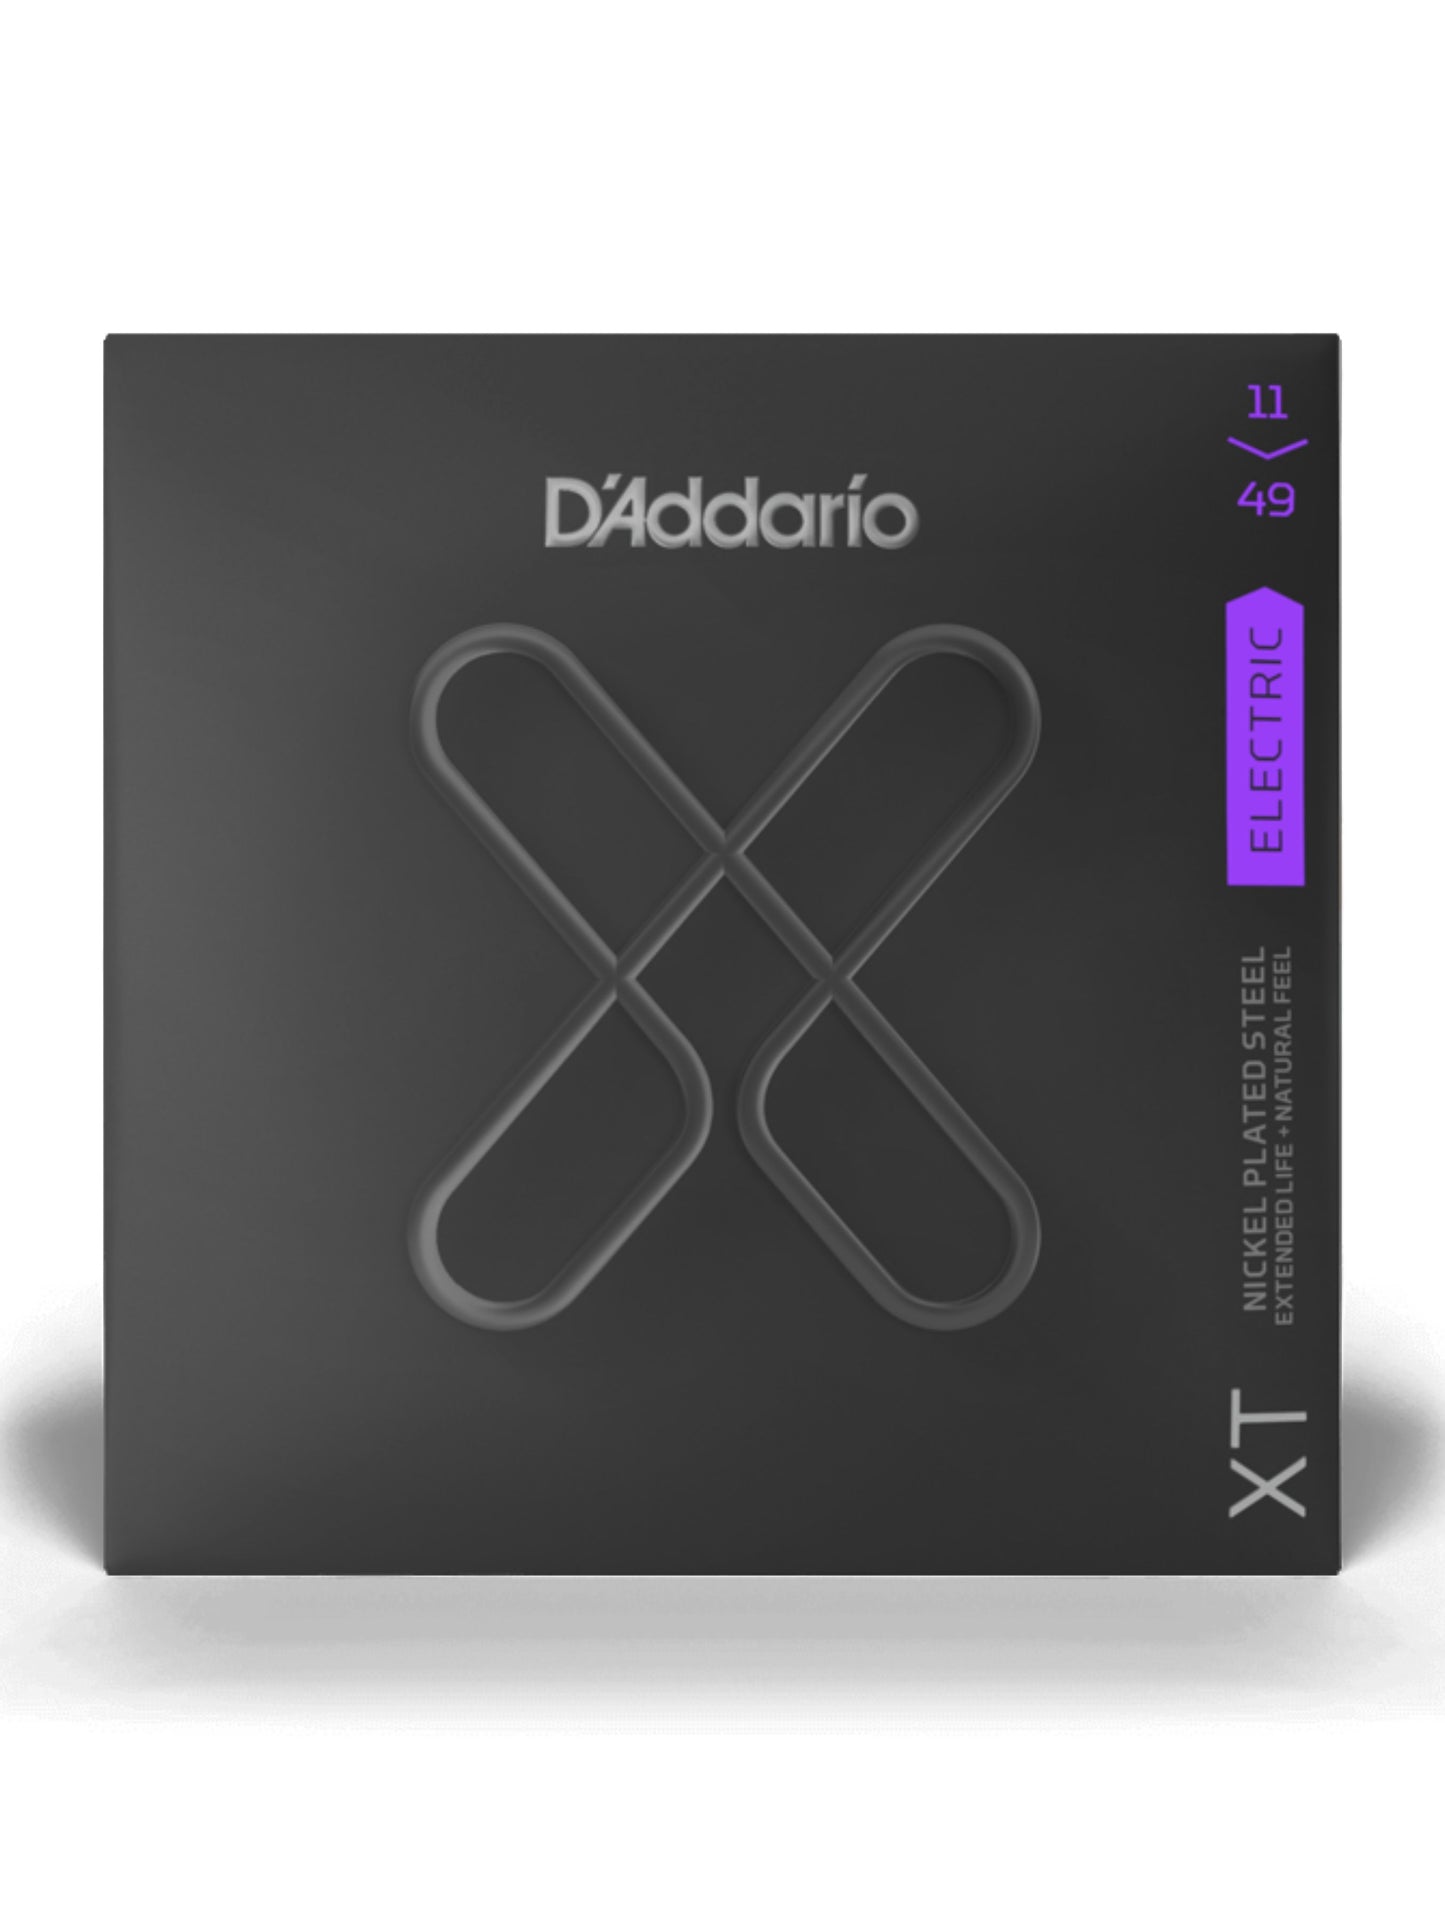 D'Addario XT Nicked Plated Steel Electric Guitar Strings